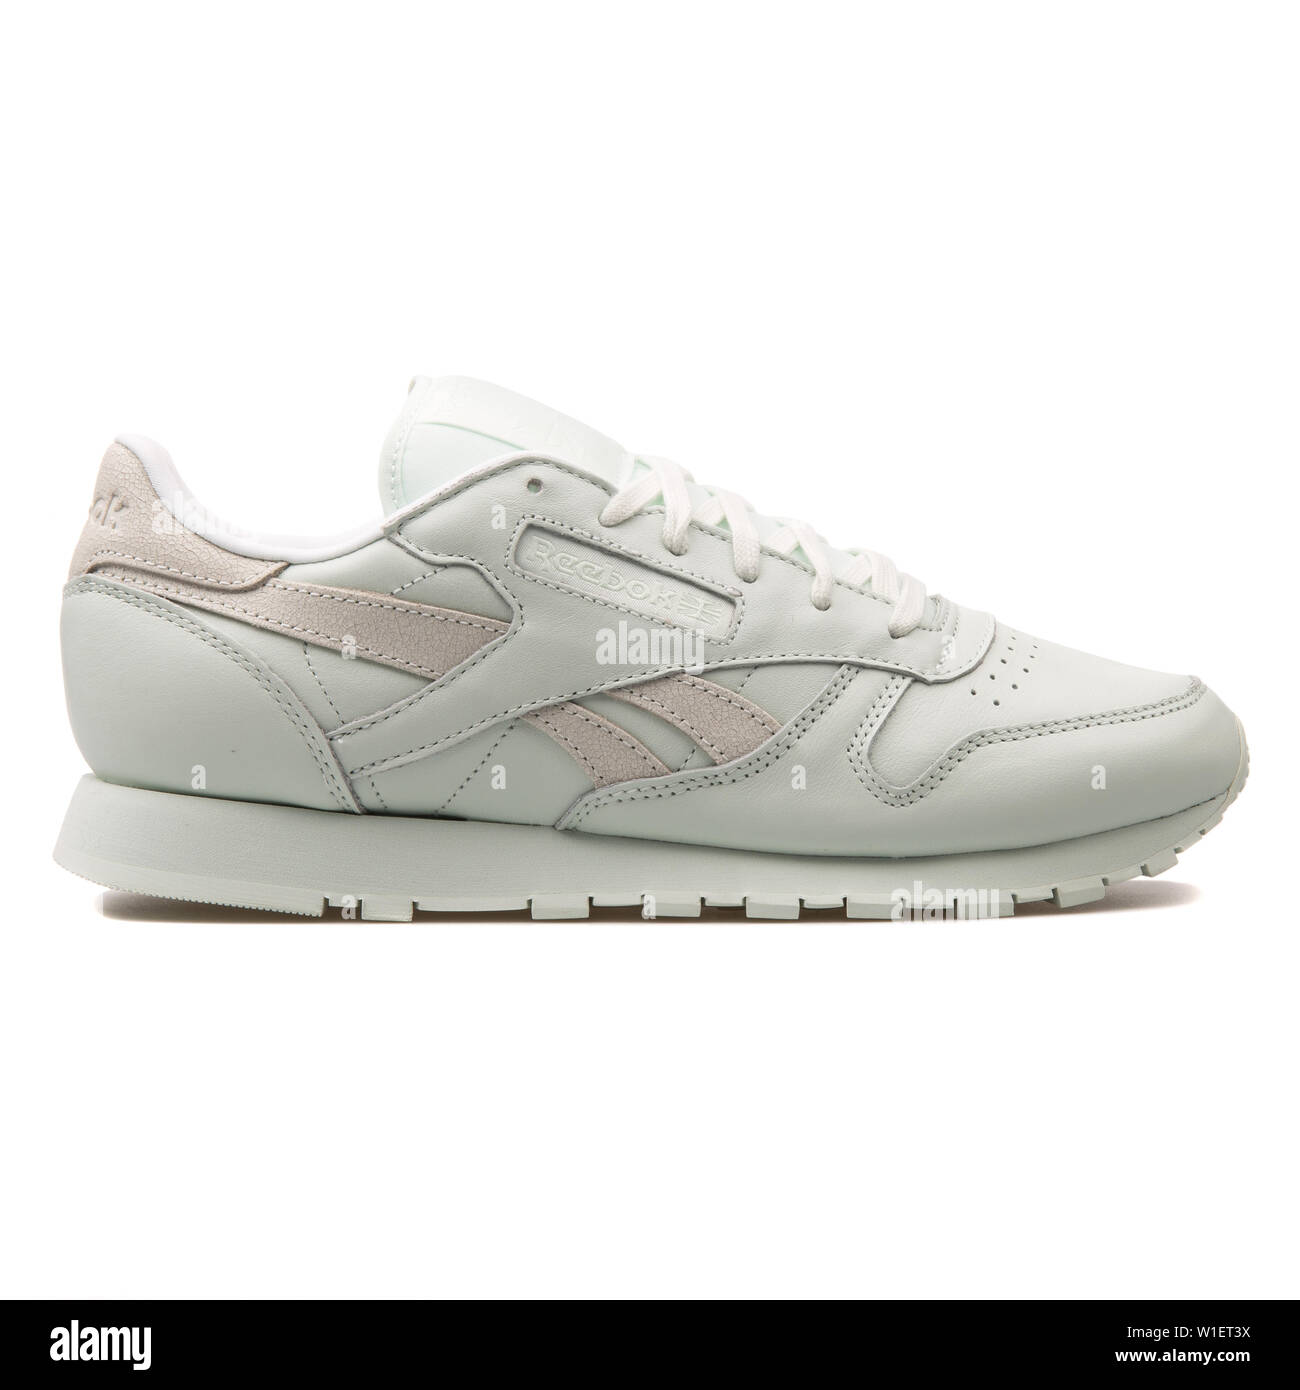 reebok classic gold leather spirit sneakers